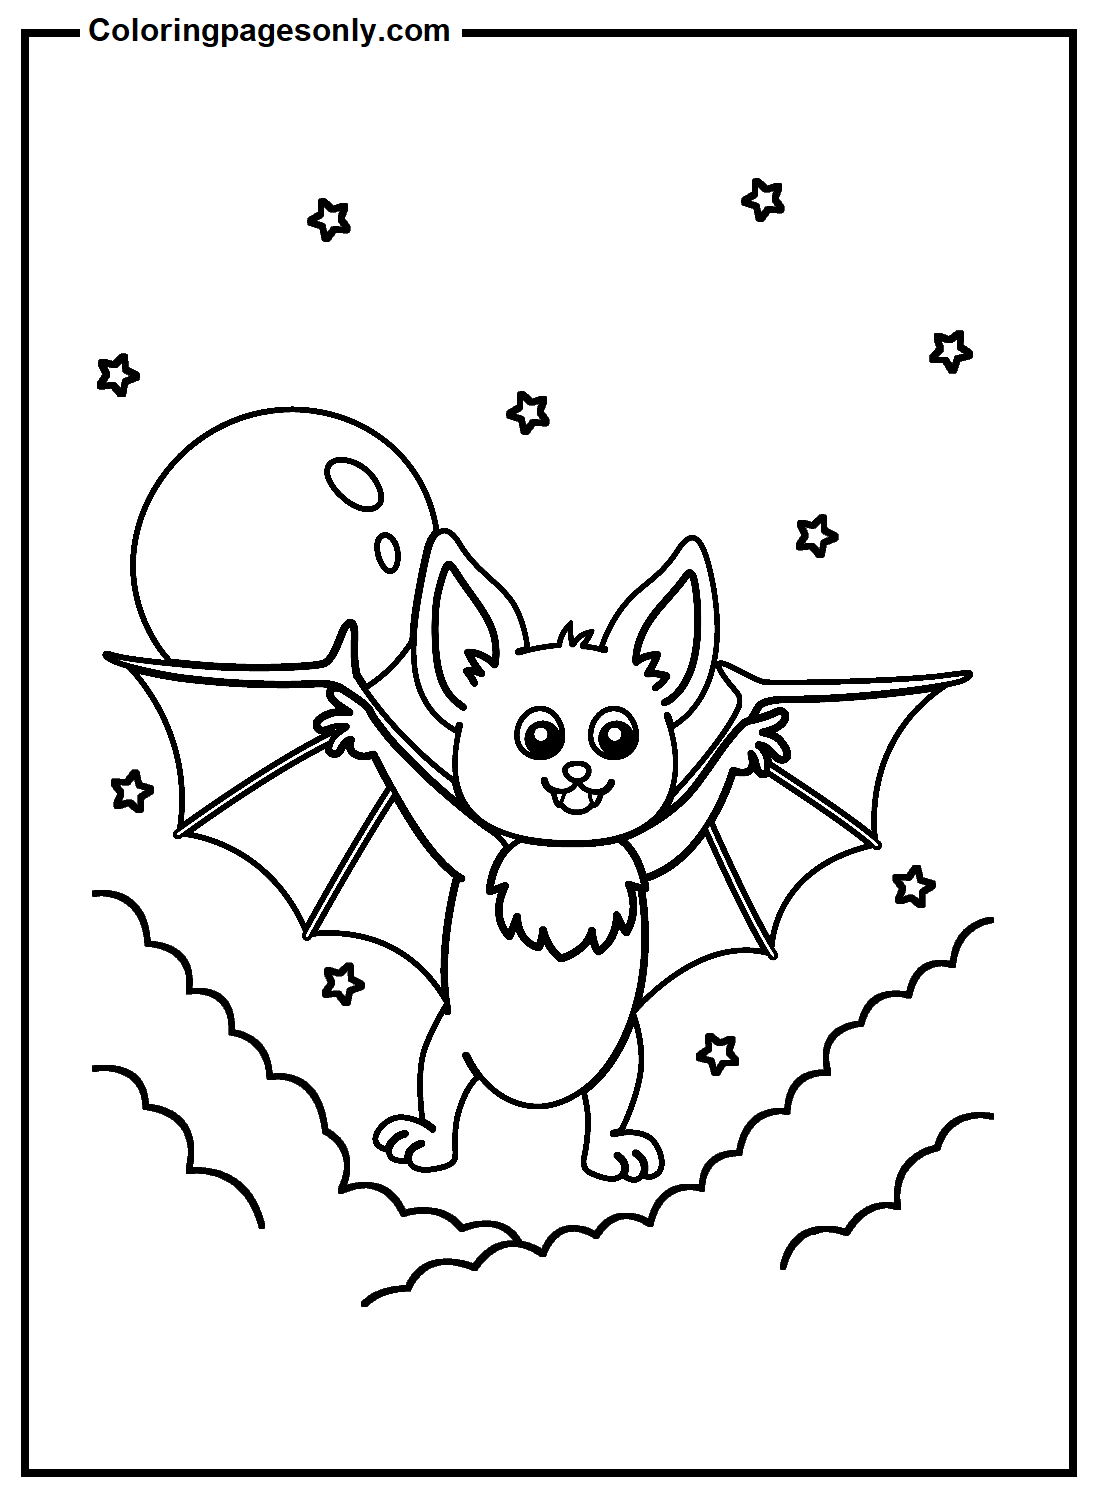 Bat for Kids Coloring Page